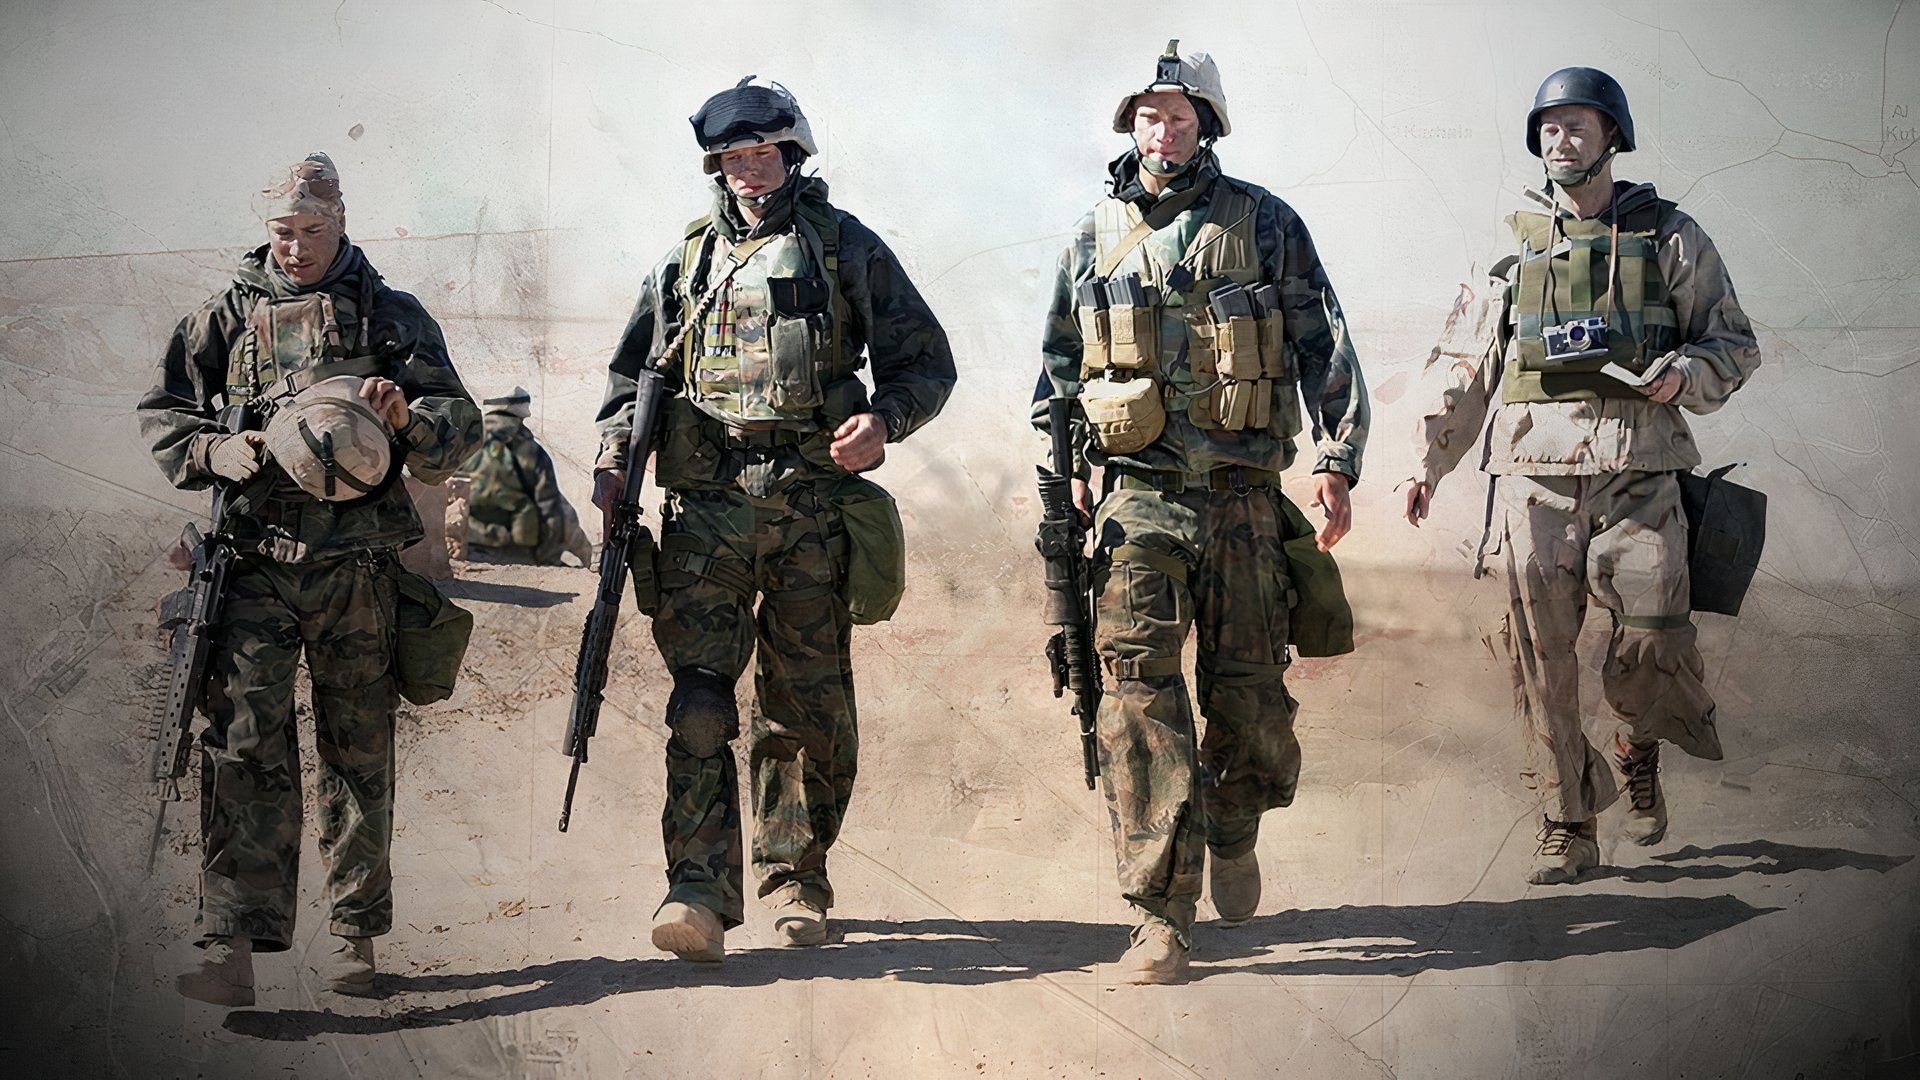 Marines march in the desert in Generation Kill